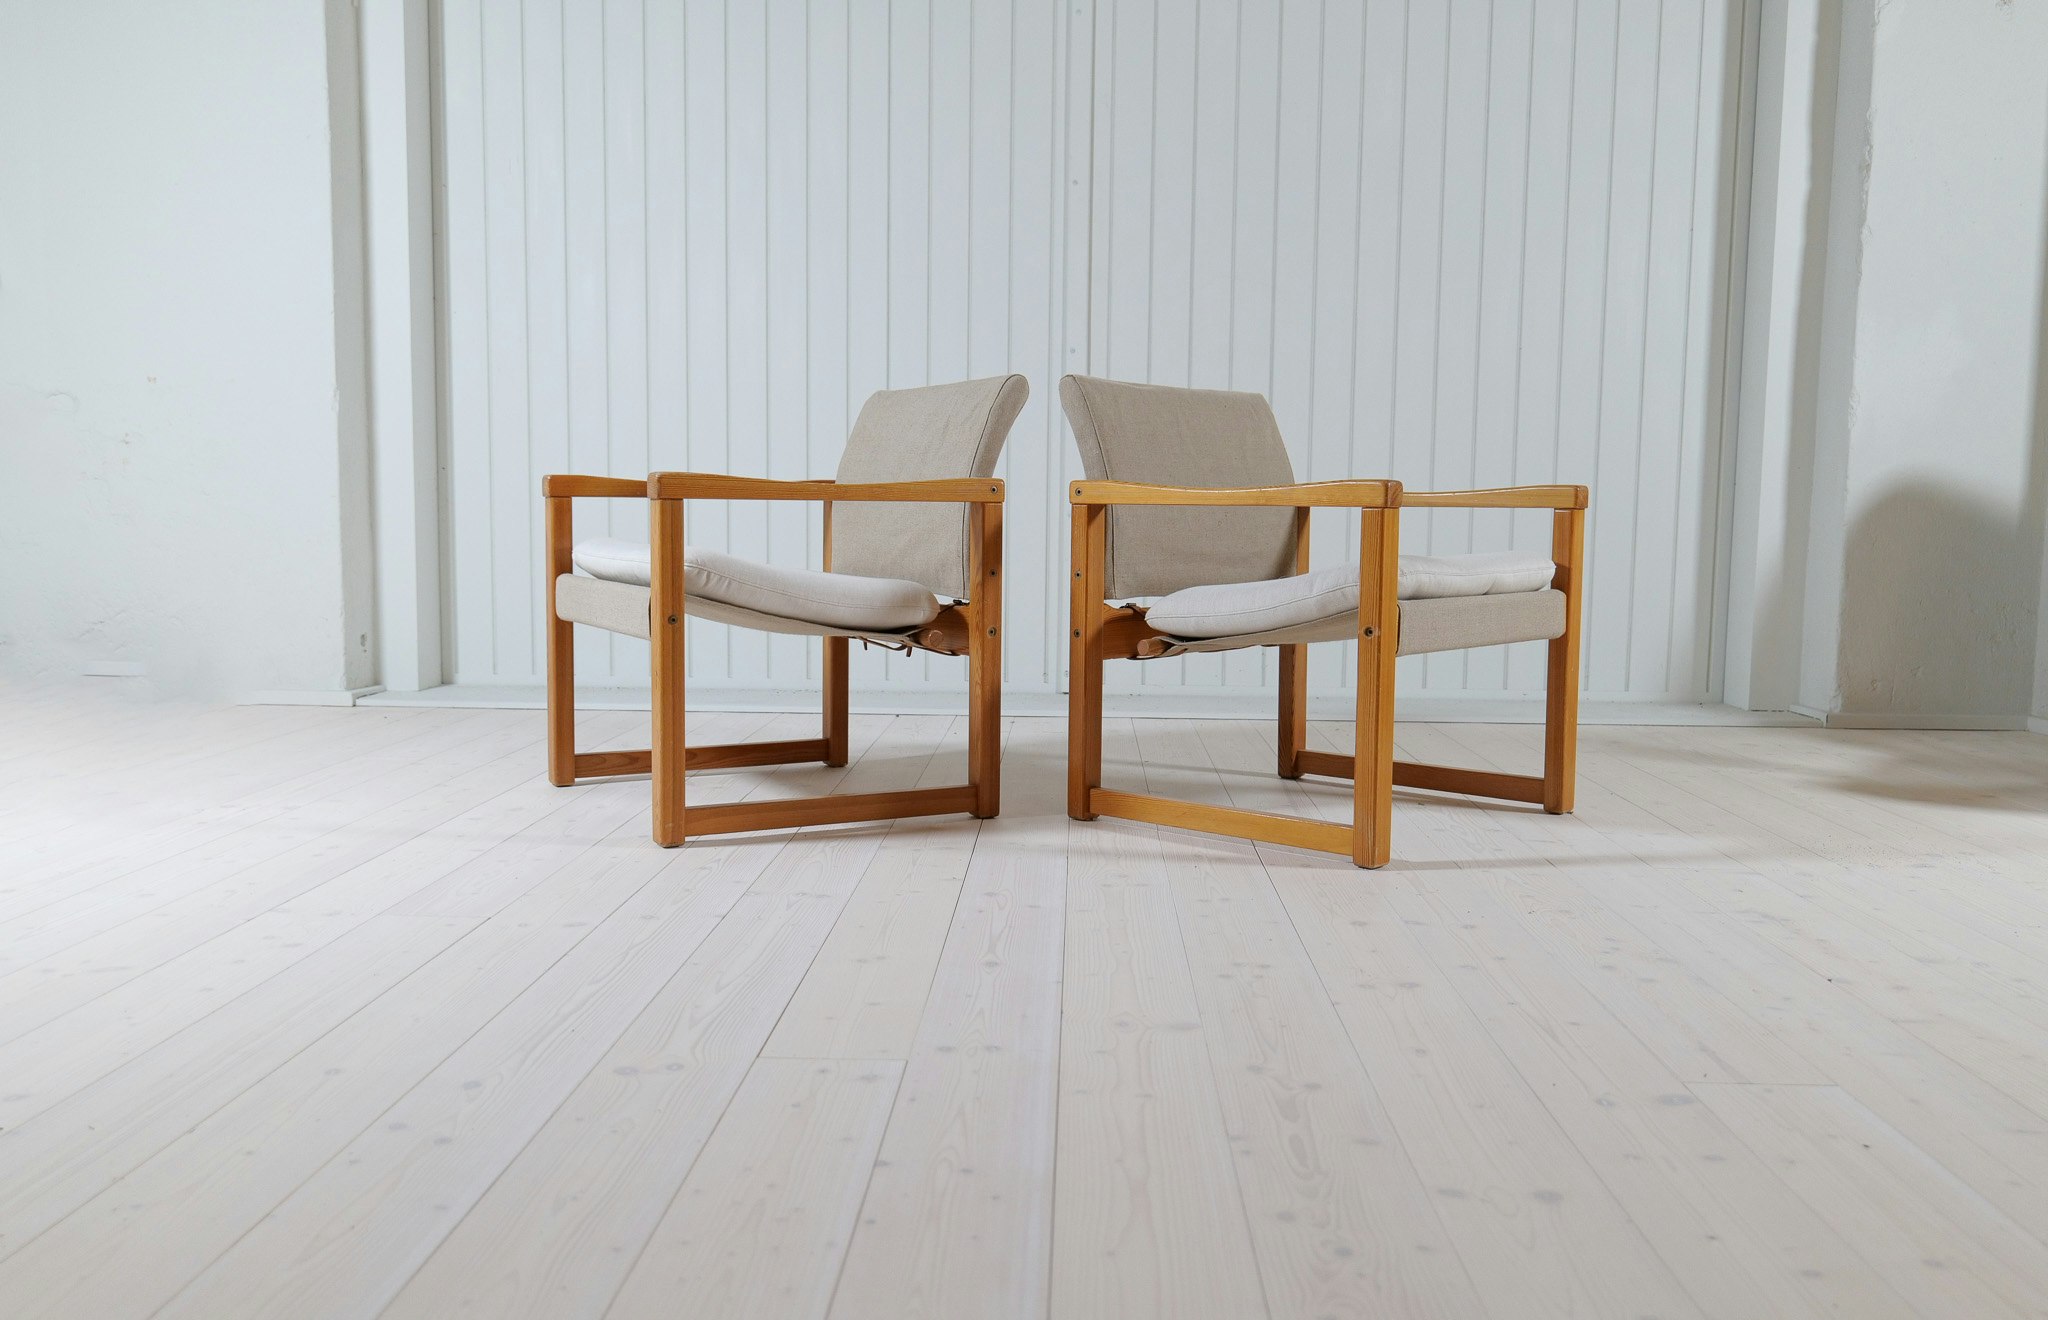 Midcentury Modern Karin Mobring Armchairs Model Diana by Ikea in Sweden, 1970s